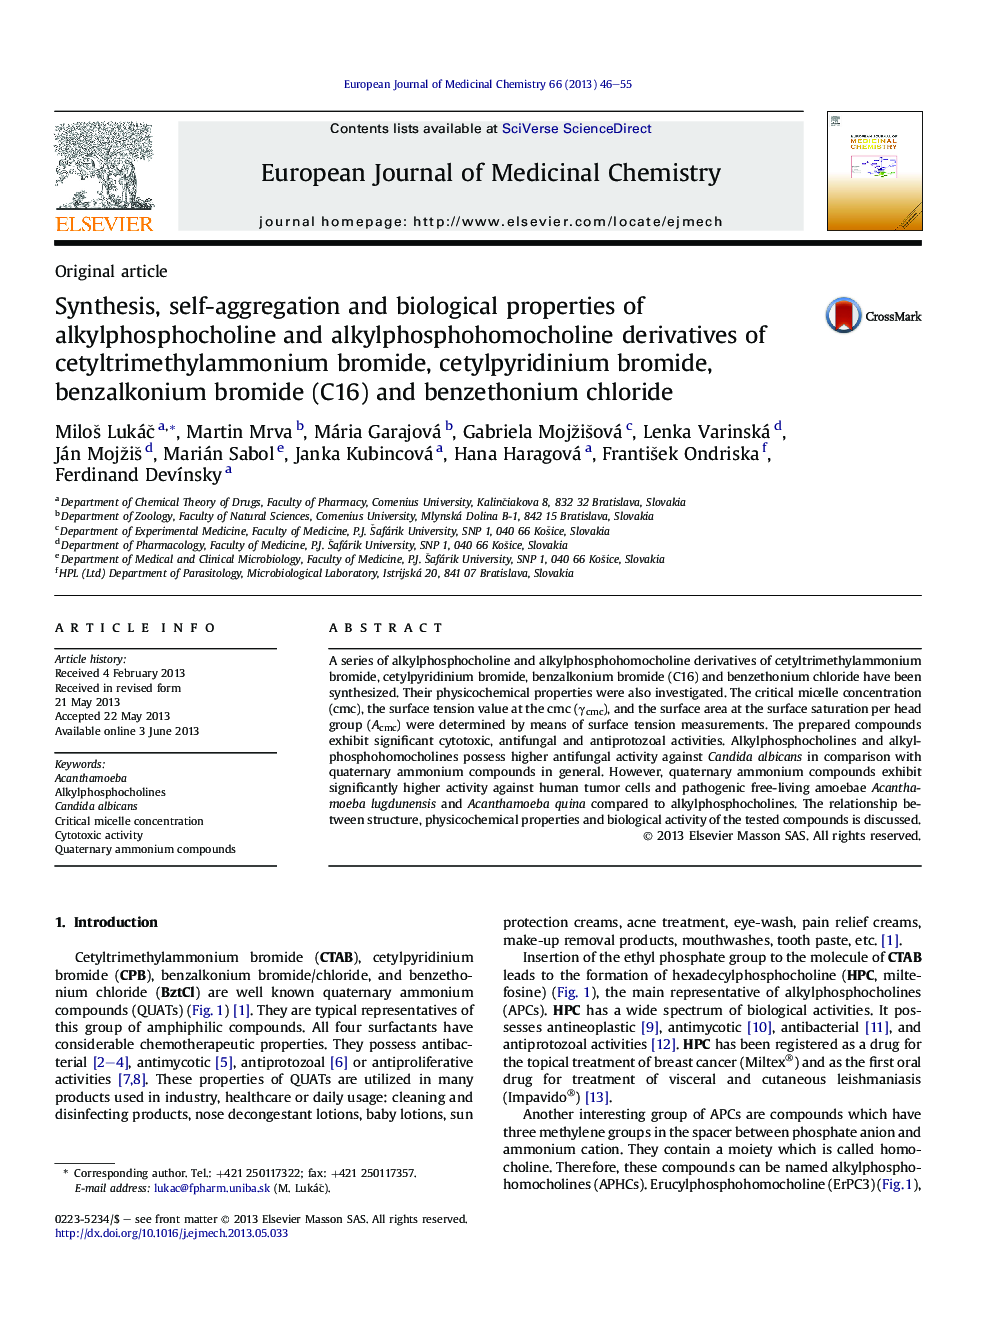 Synthesis, self-aggregation and biological properties of alkylphosphocholine and alkylphosphohomocholine derivatives of cetyltrimethylammonium bromide, cetylpyridinium bromide, benzalkonium bromide (C16) and benzethonium chloride